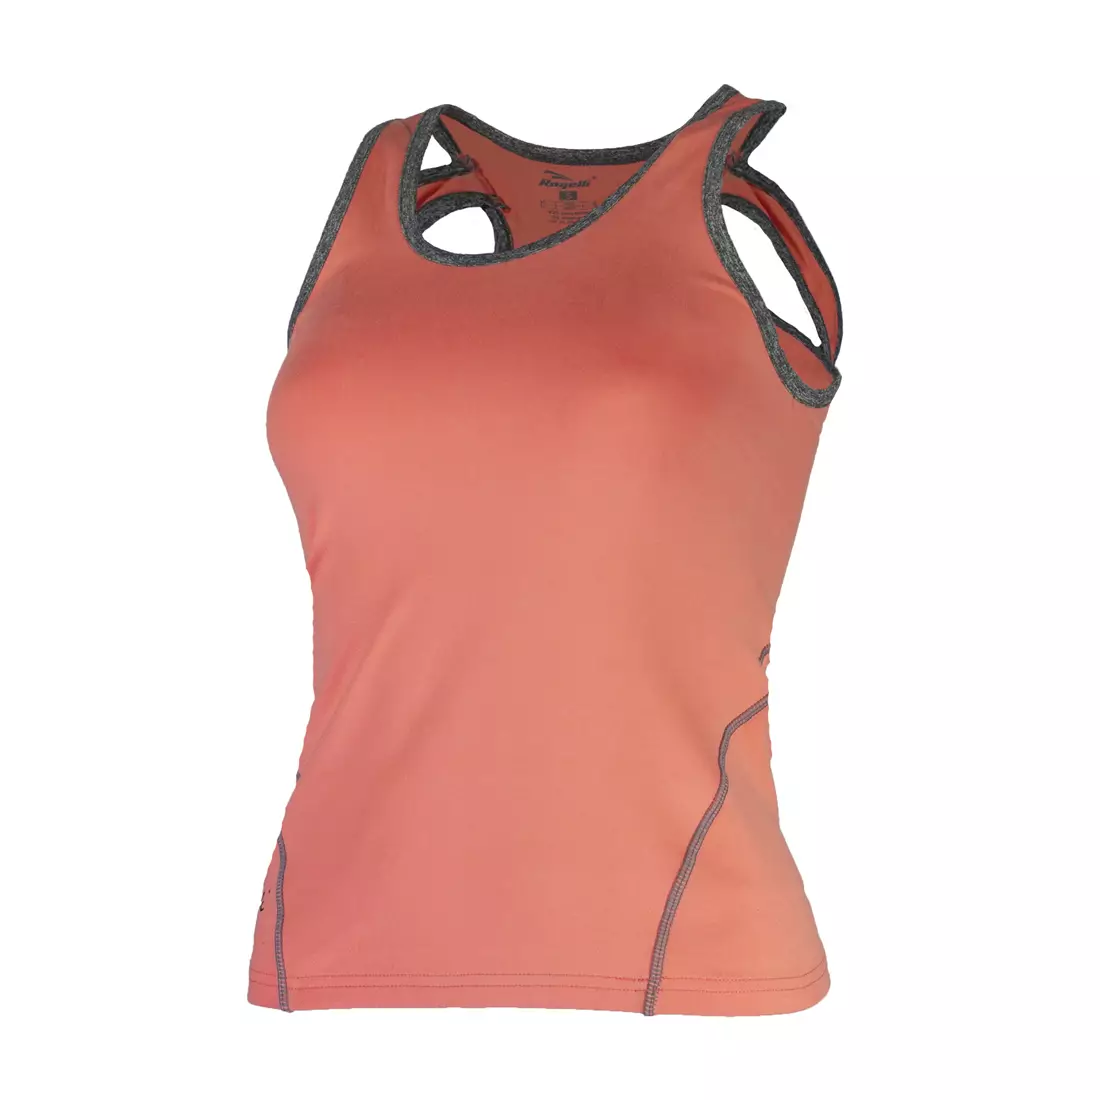 ROGELLI ROMILDA women's sports T-shirt/top 050.407, color: coral